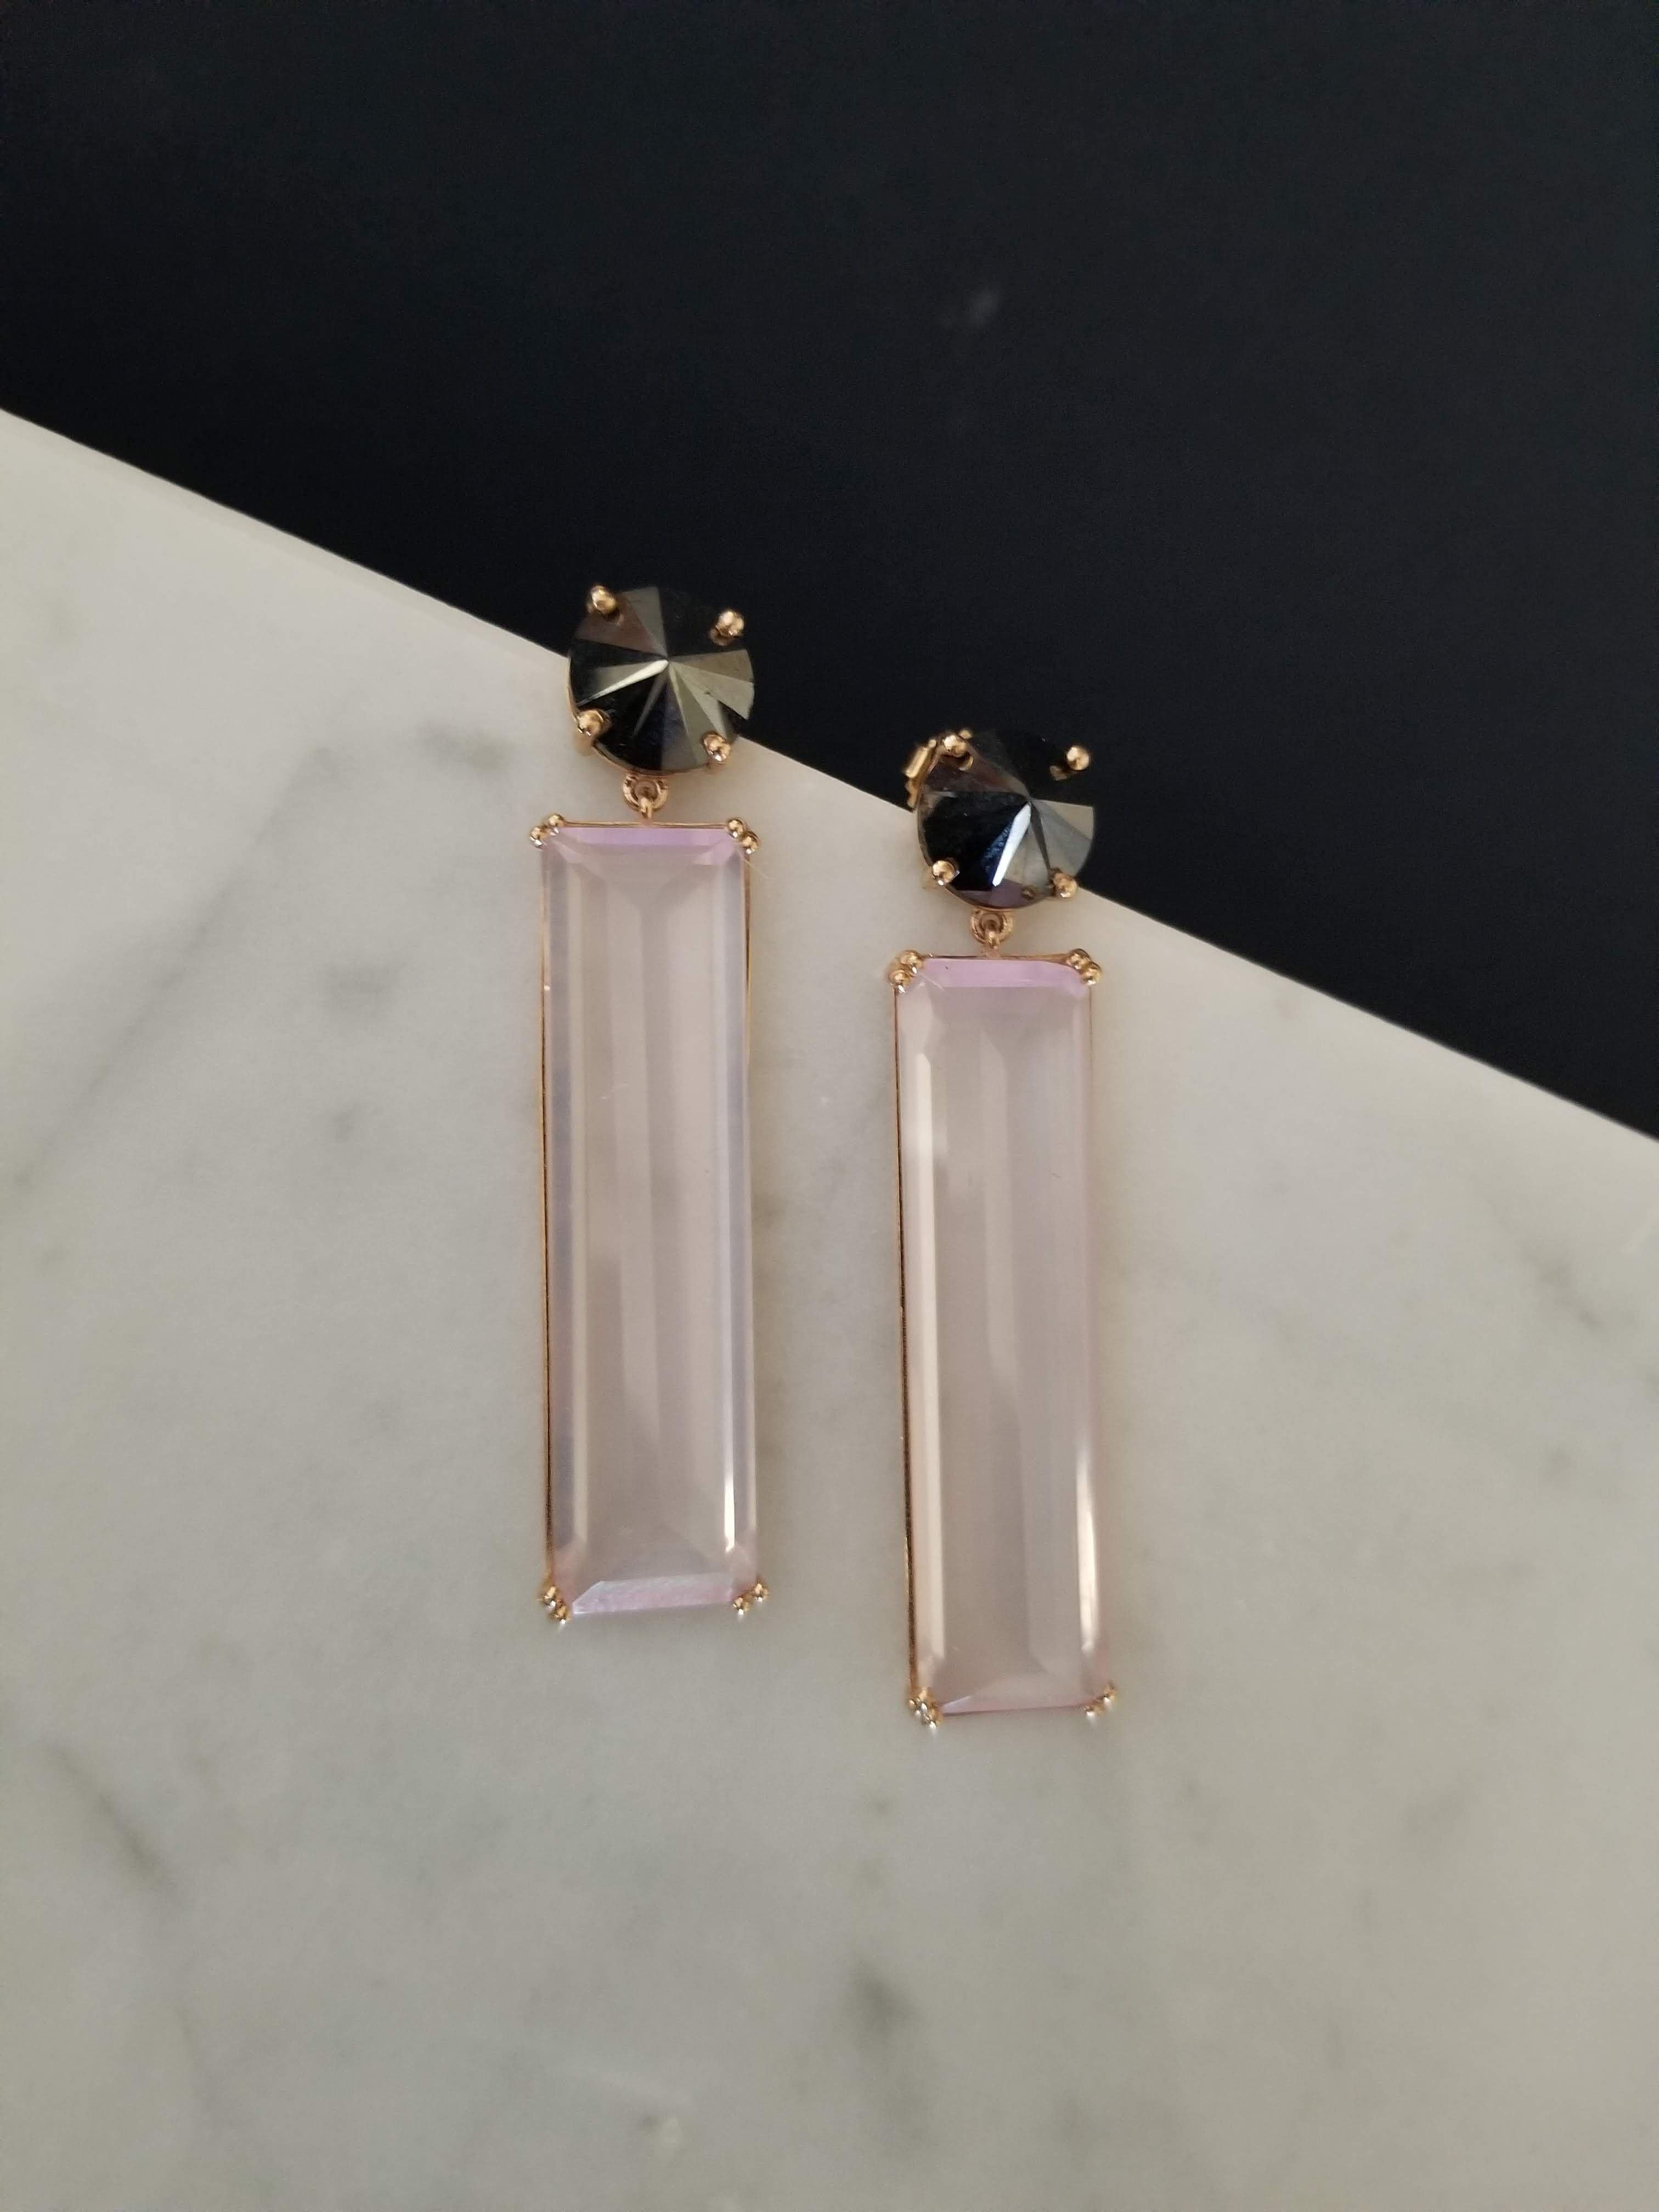 These beautiful earrings have 2 Rectangular Rose Quartz Gems Weighing 44.51cts and 2 Round Black Diamonds Weighing 9.98cts Set in Reverse!!! 

Everything is set in 14K Rose Gold and 2.25 inches long. 

Such a beautiful piece to add to your